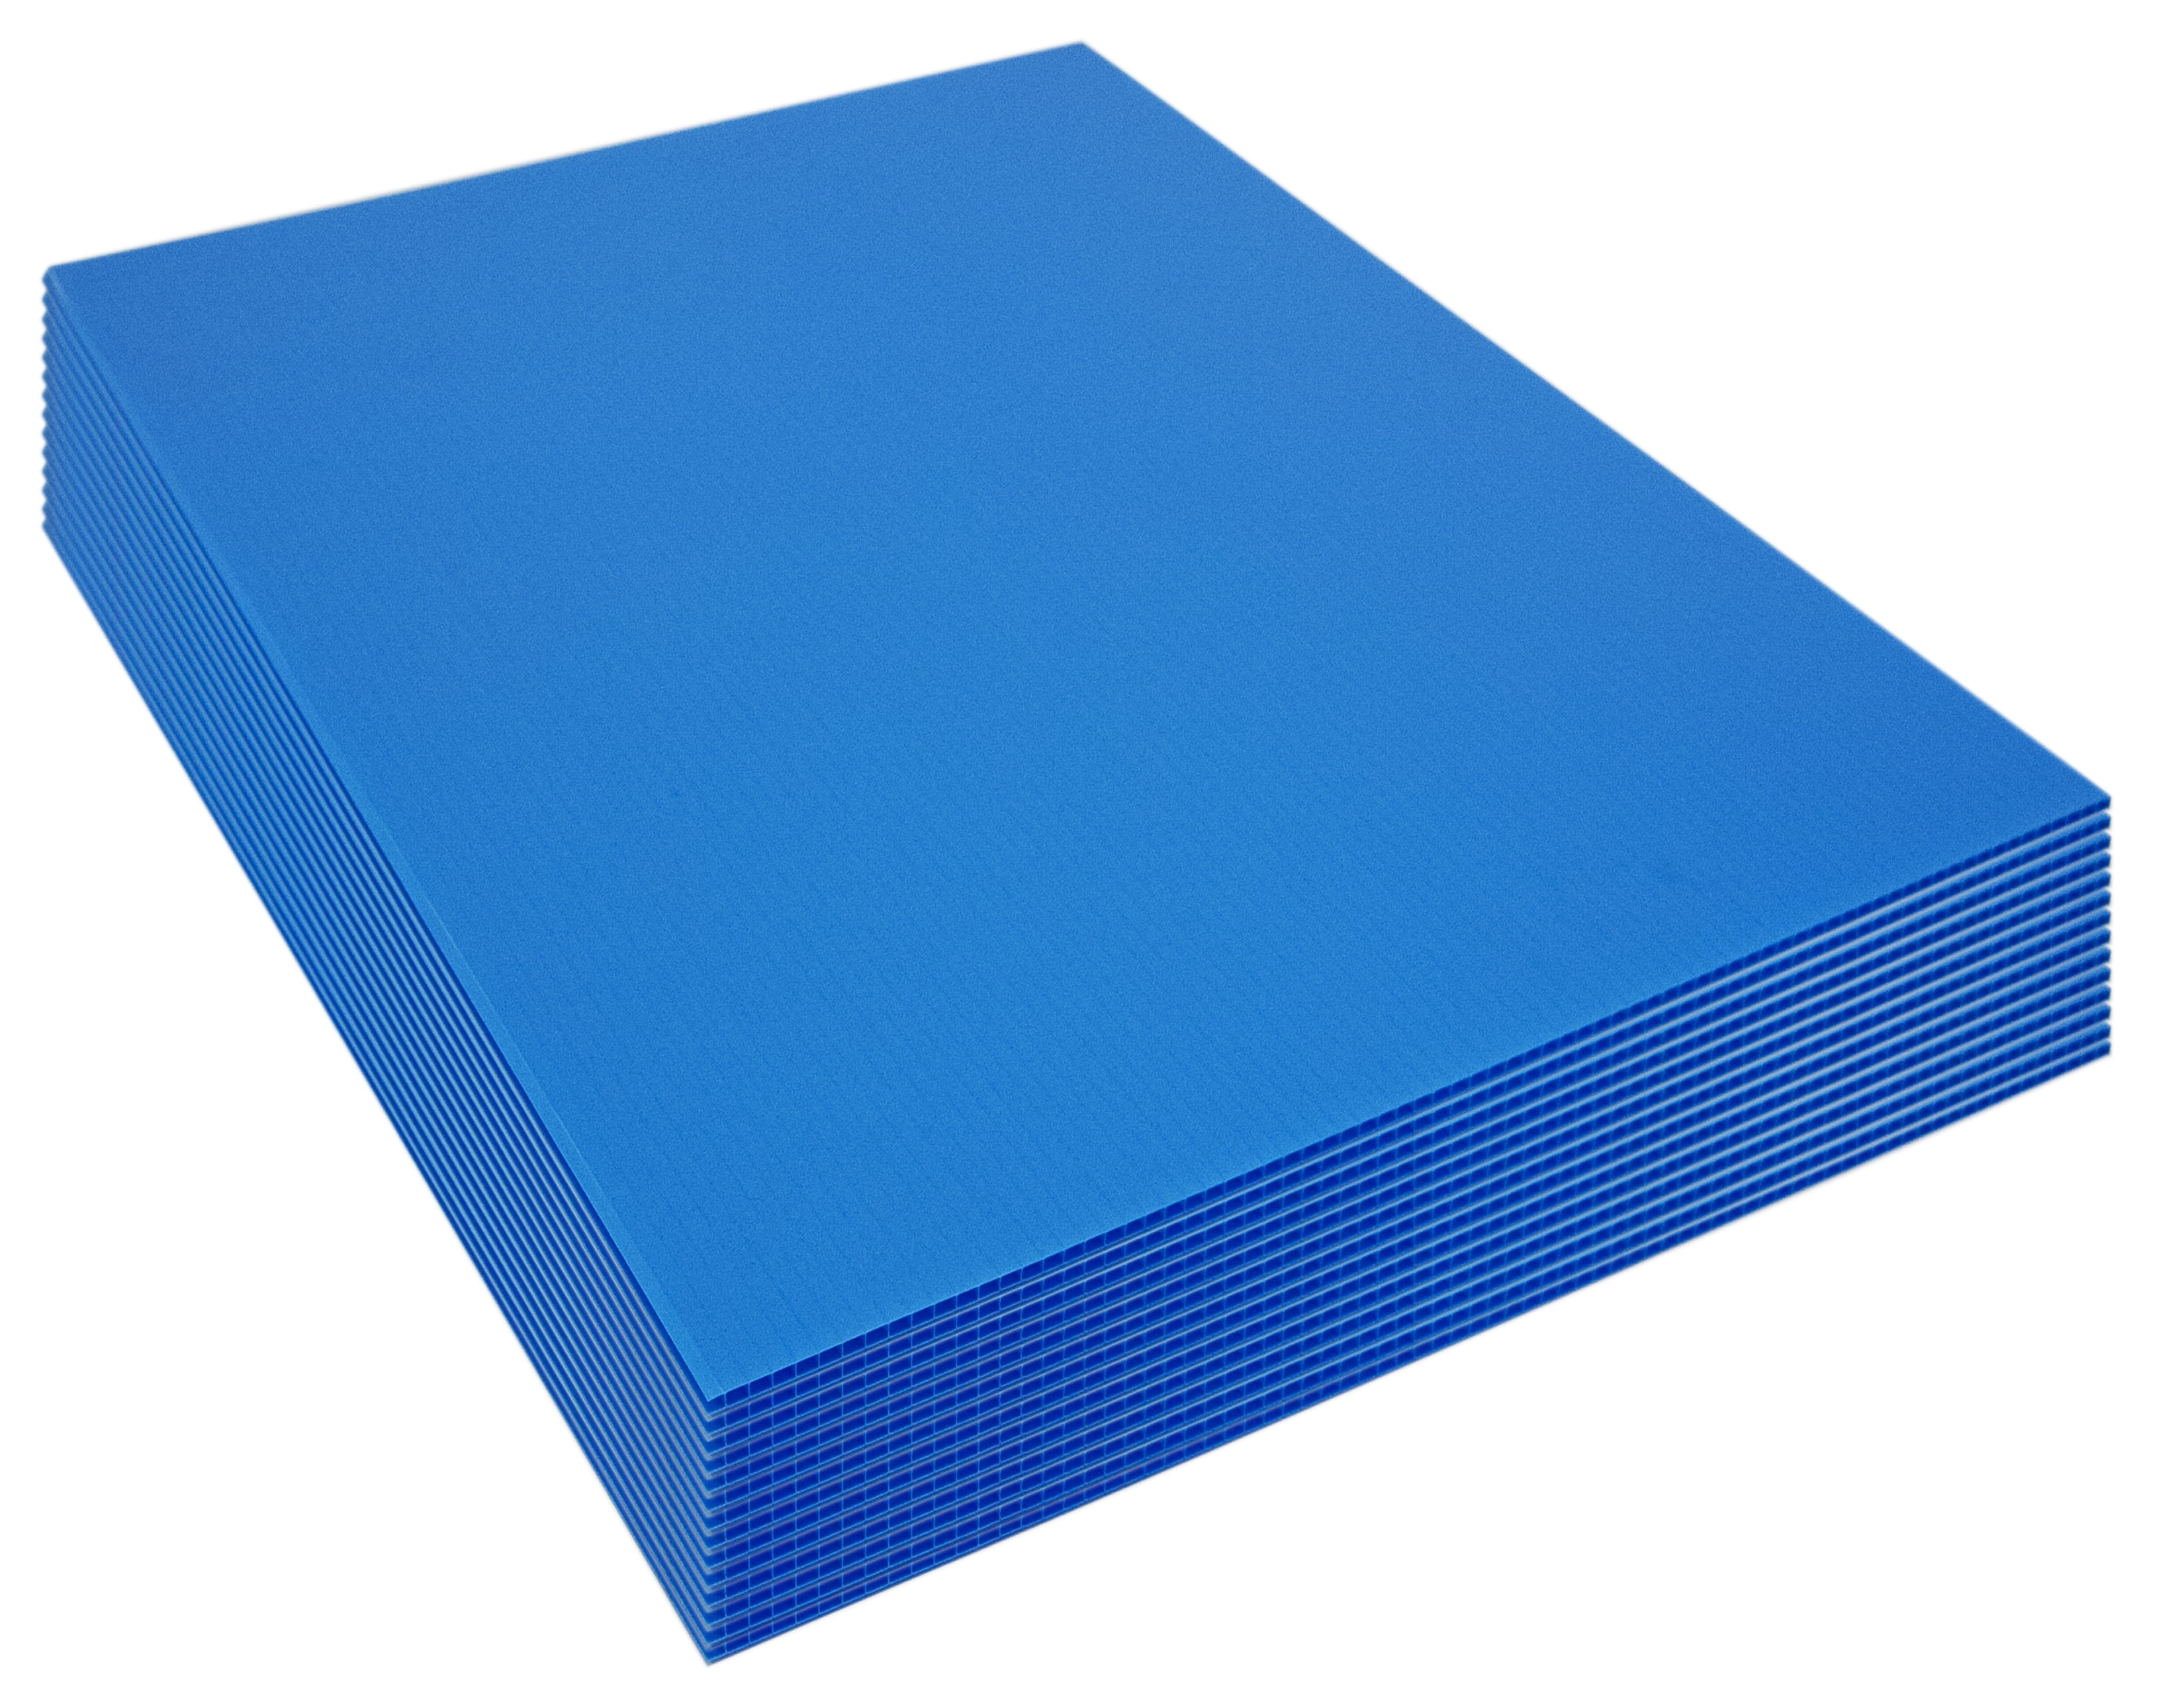 CraftTex Bubbalux Craft Board Marine Blue 2 Sheets Large Size 20 x 30